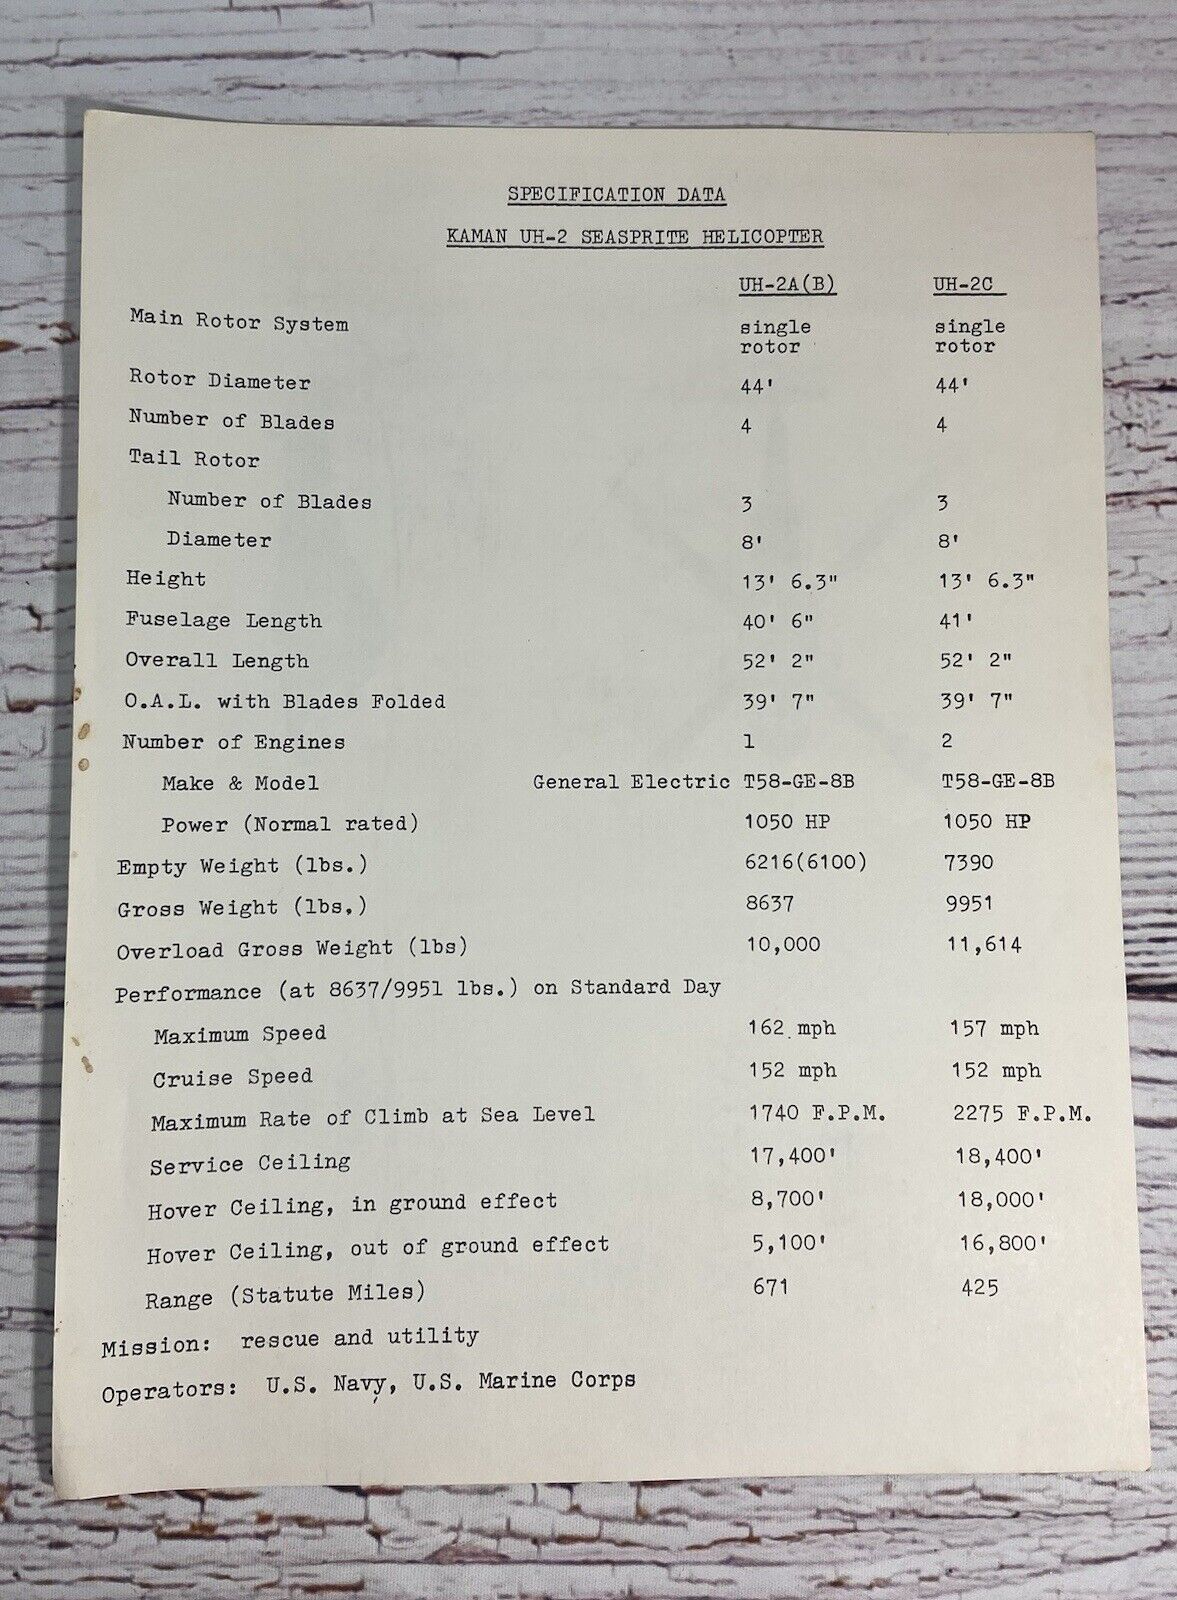 VTG SPECIFICATION DATA FOR KAMAN UH-2 SEASPRITE HELICOPTER & DIMENSIONS GRAPHIC